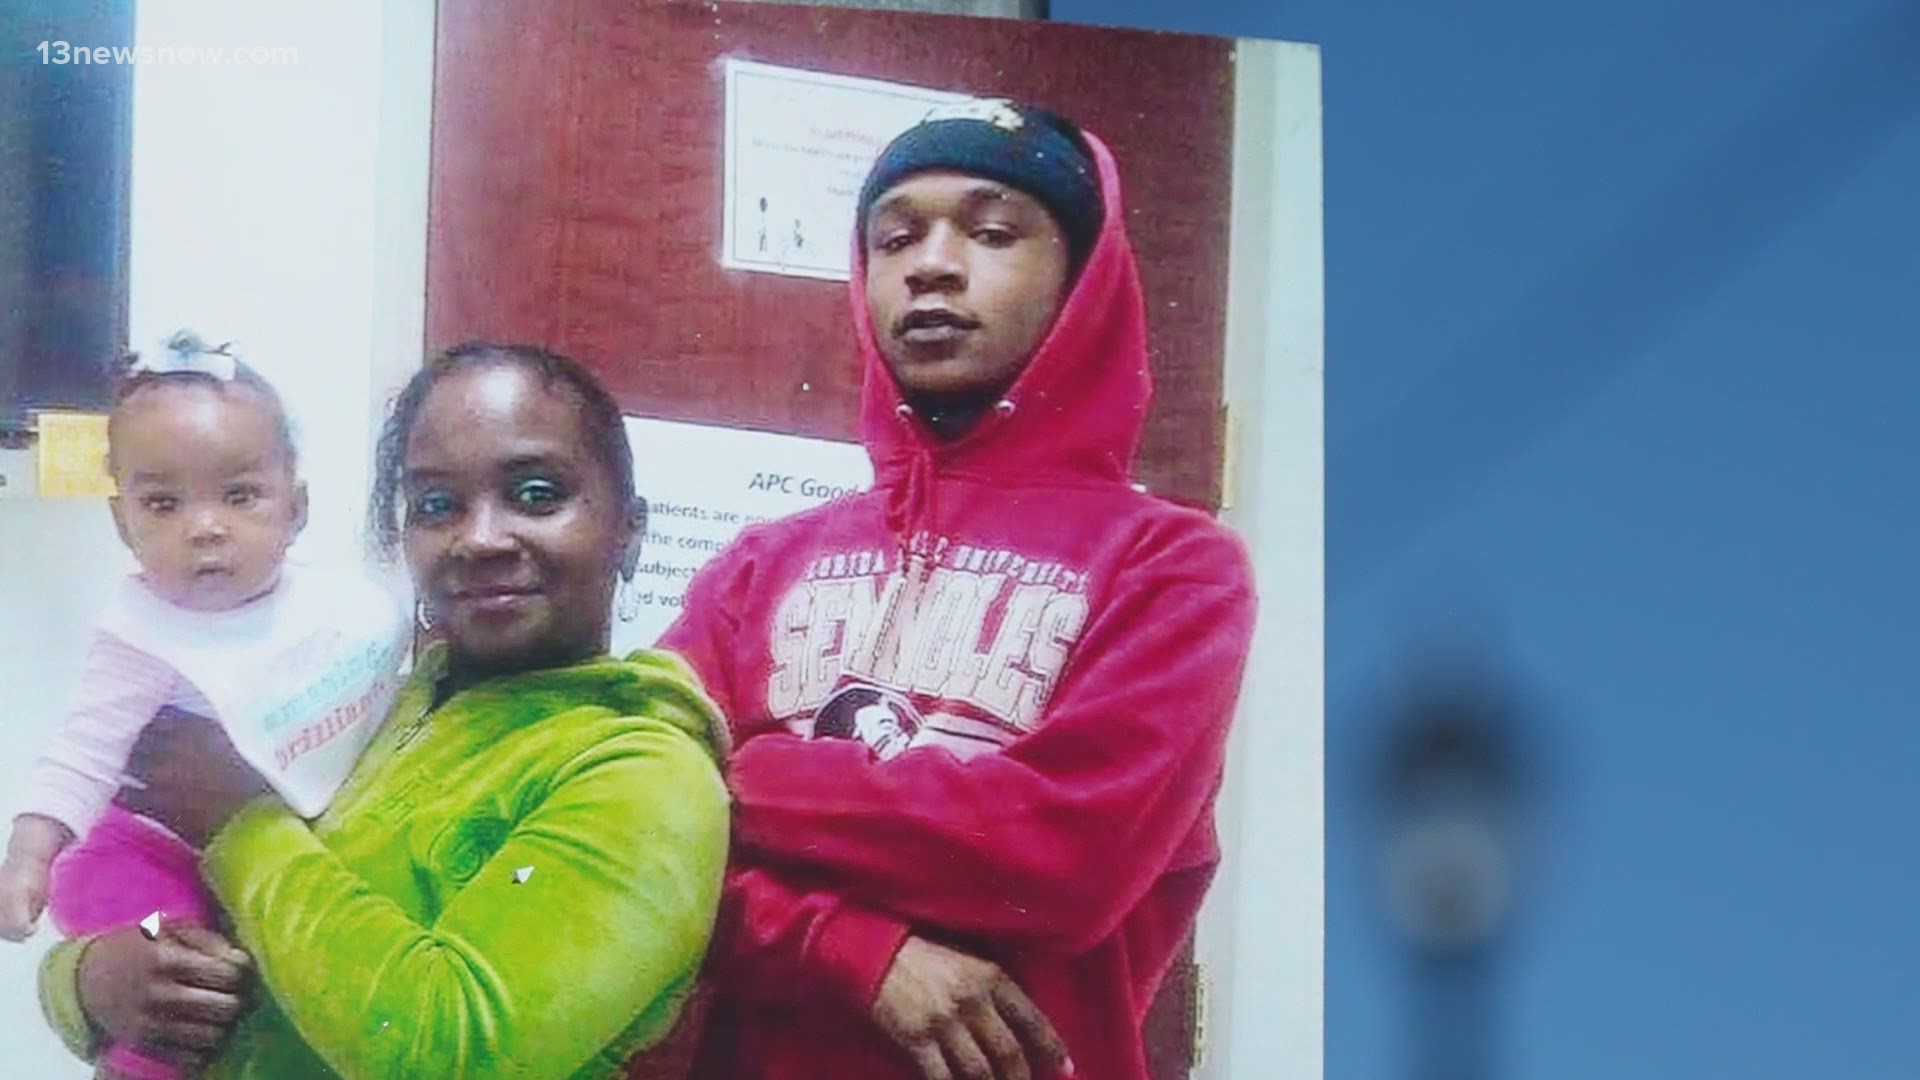 Police need your help solving a deadly shooting that left a mother pleading for answers in Newport News.